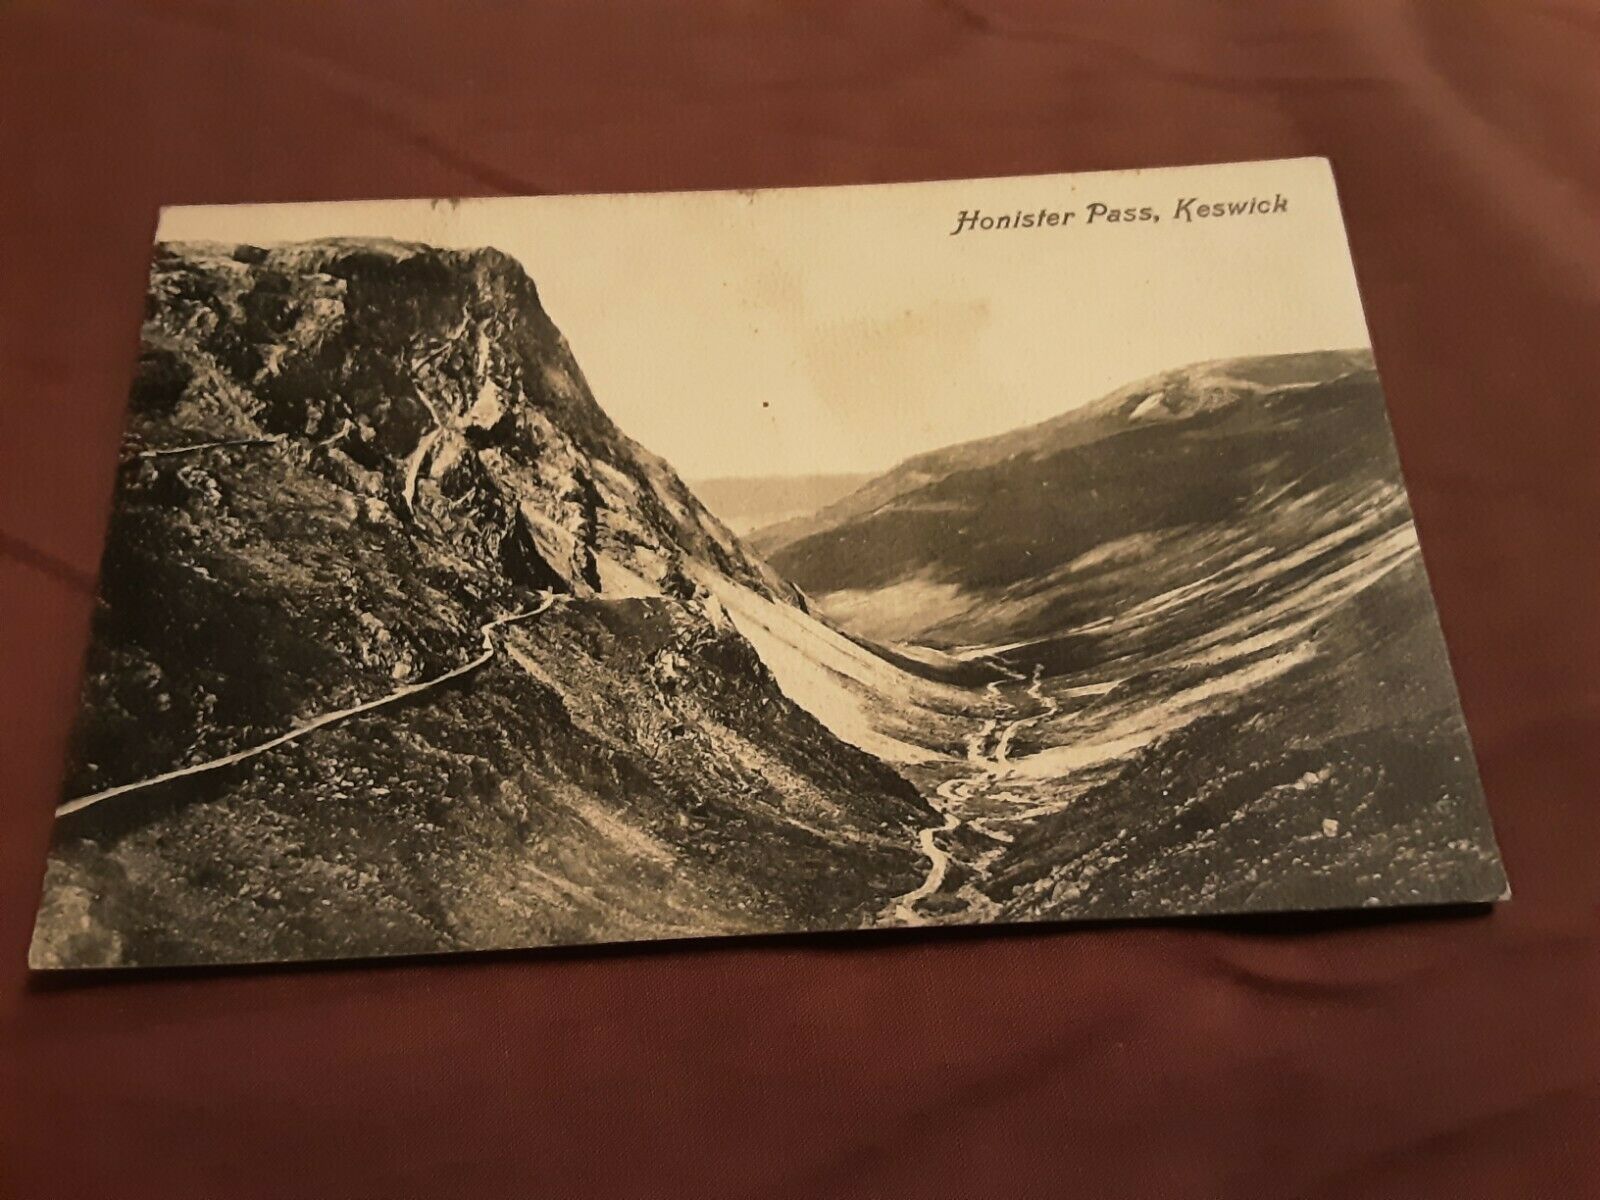 House Clearance - Old Clark's service of Honister Pass, Keswick, Cumbria posted 1910